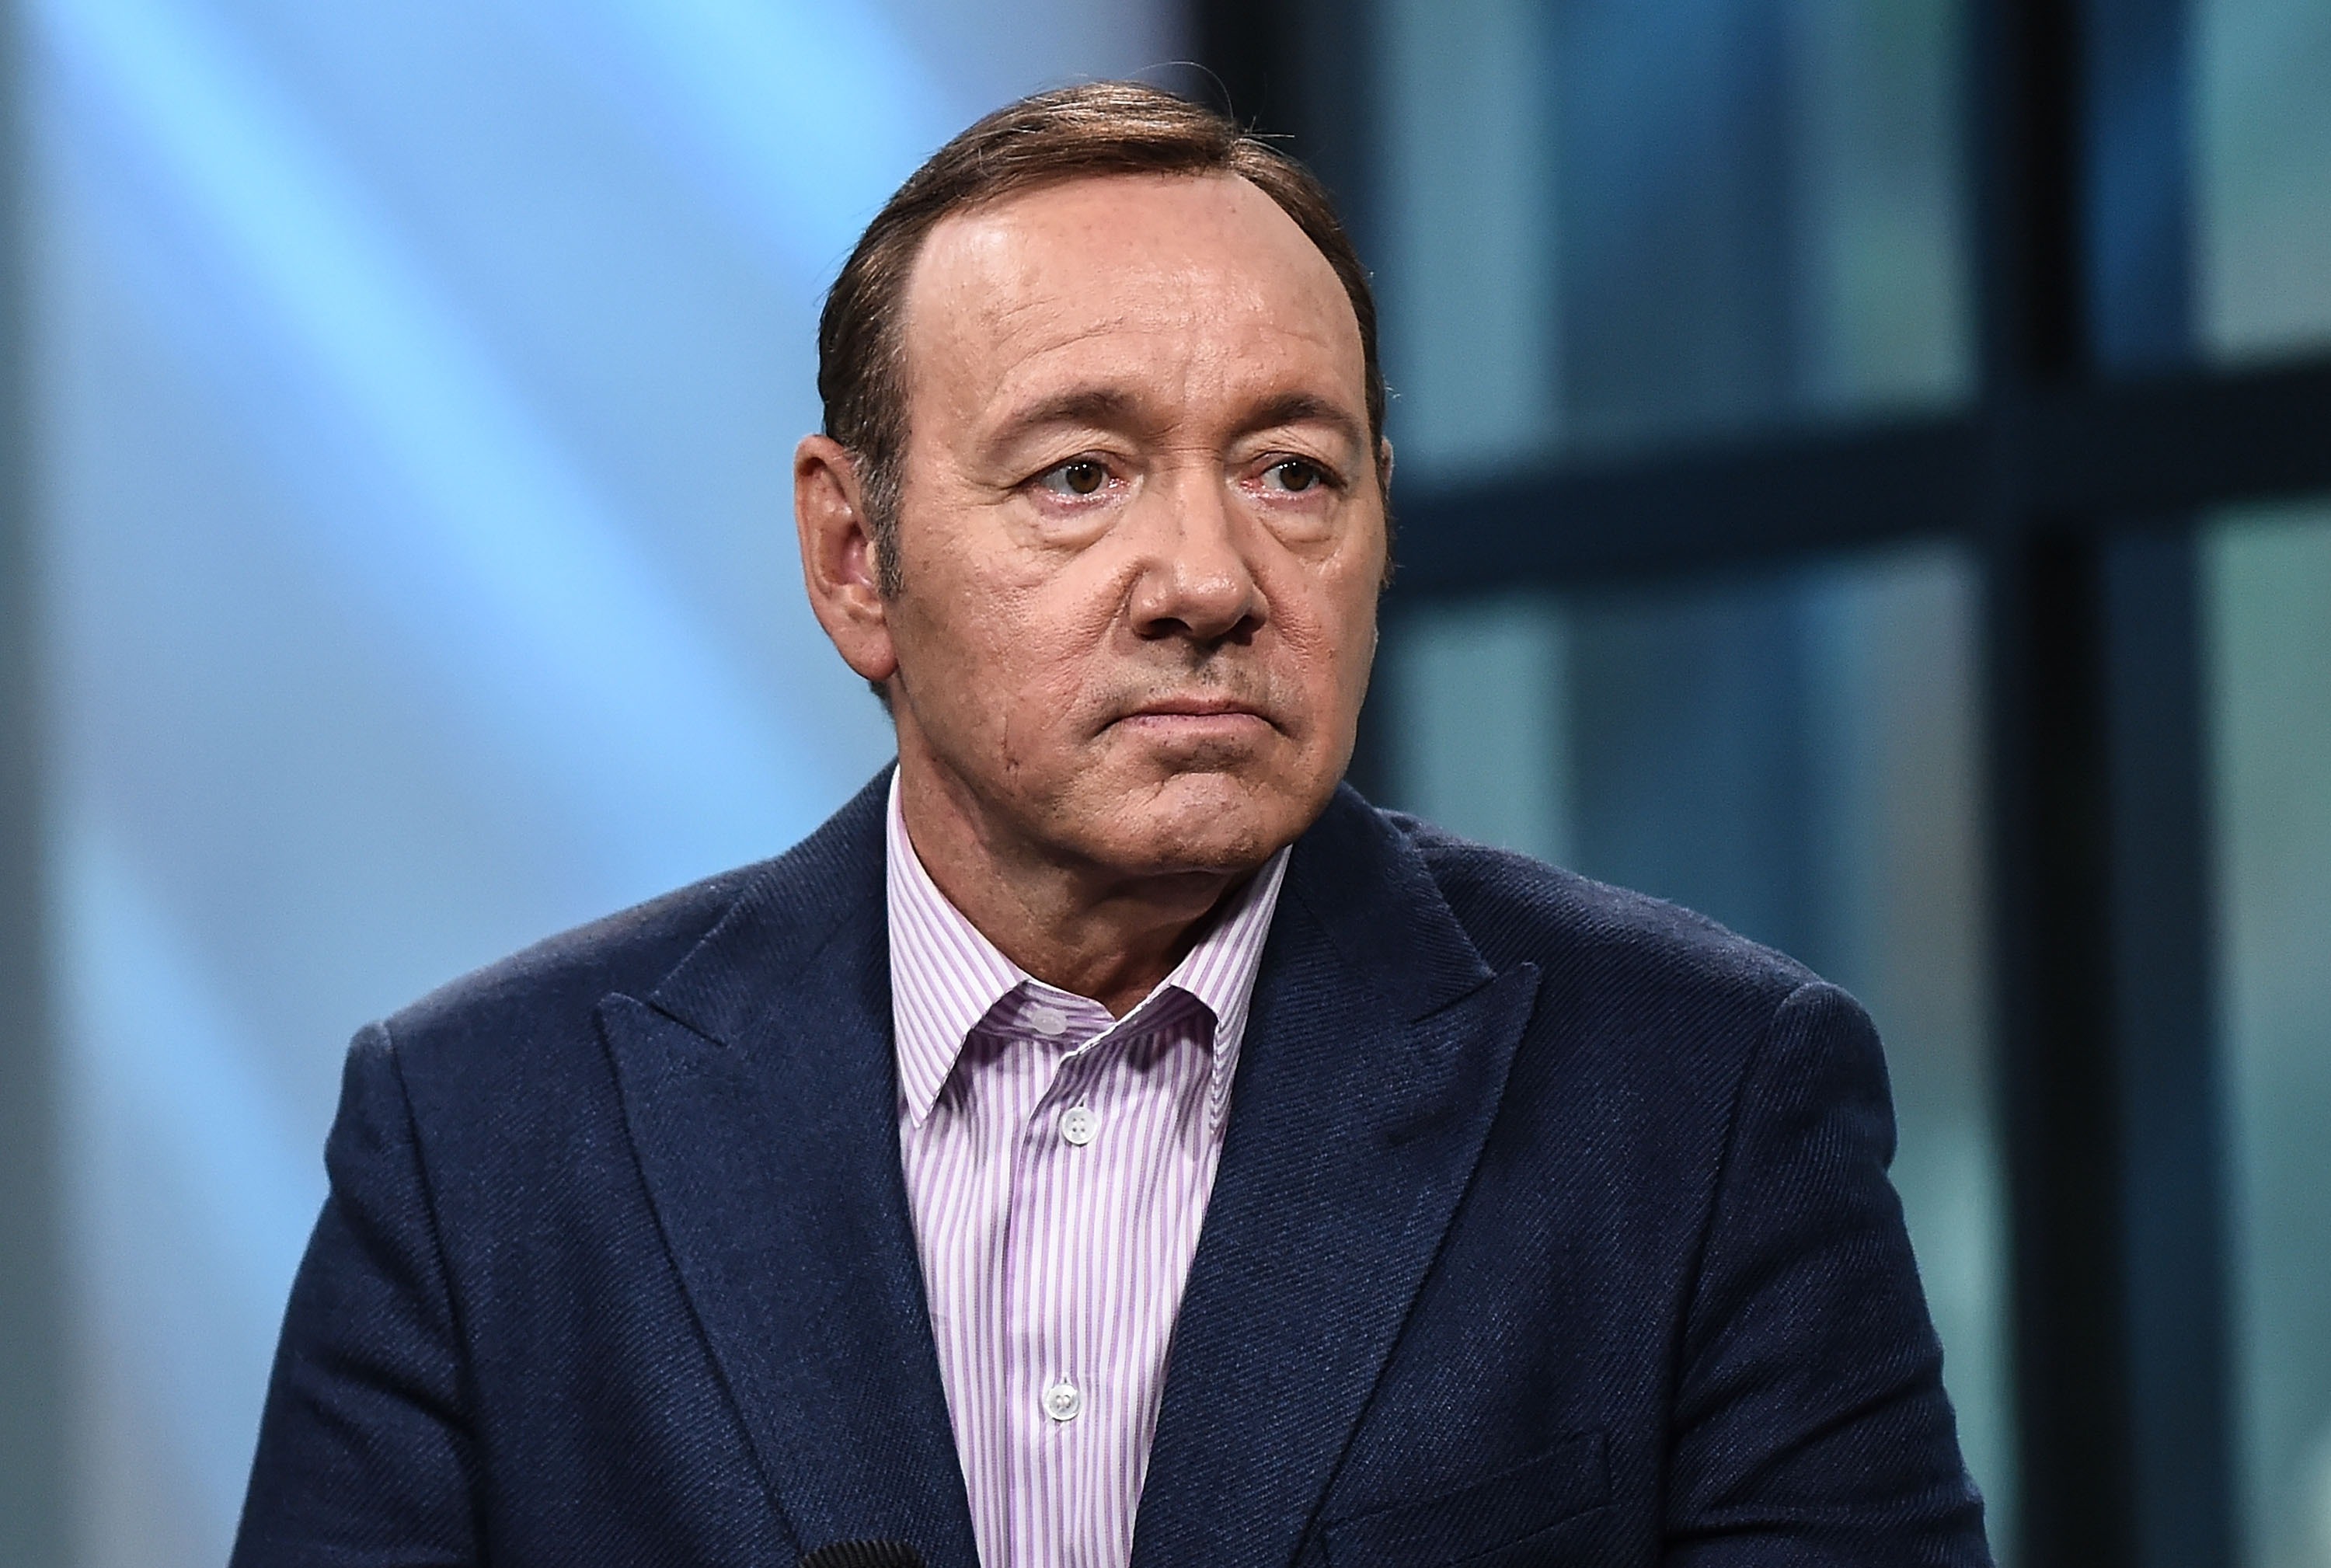 ‘House of Cards’ will end after season six, Netflix ‘deeply troubled’ by Kevin Spacey allegations